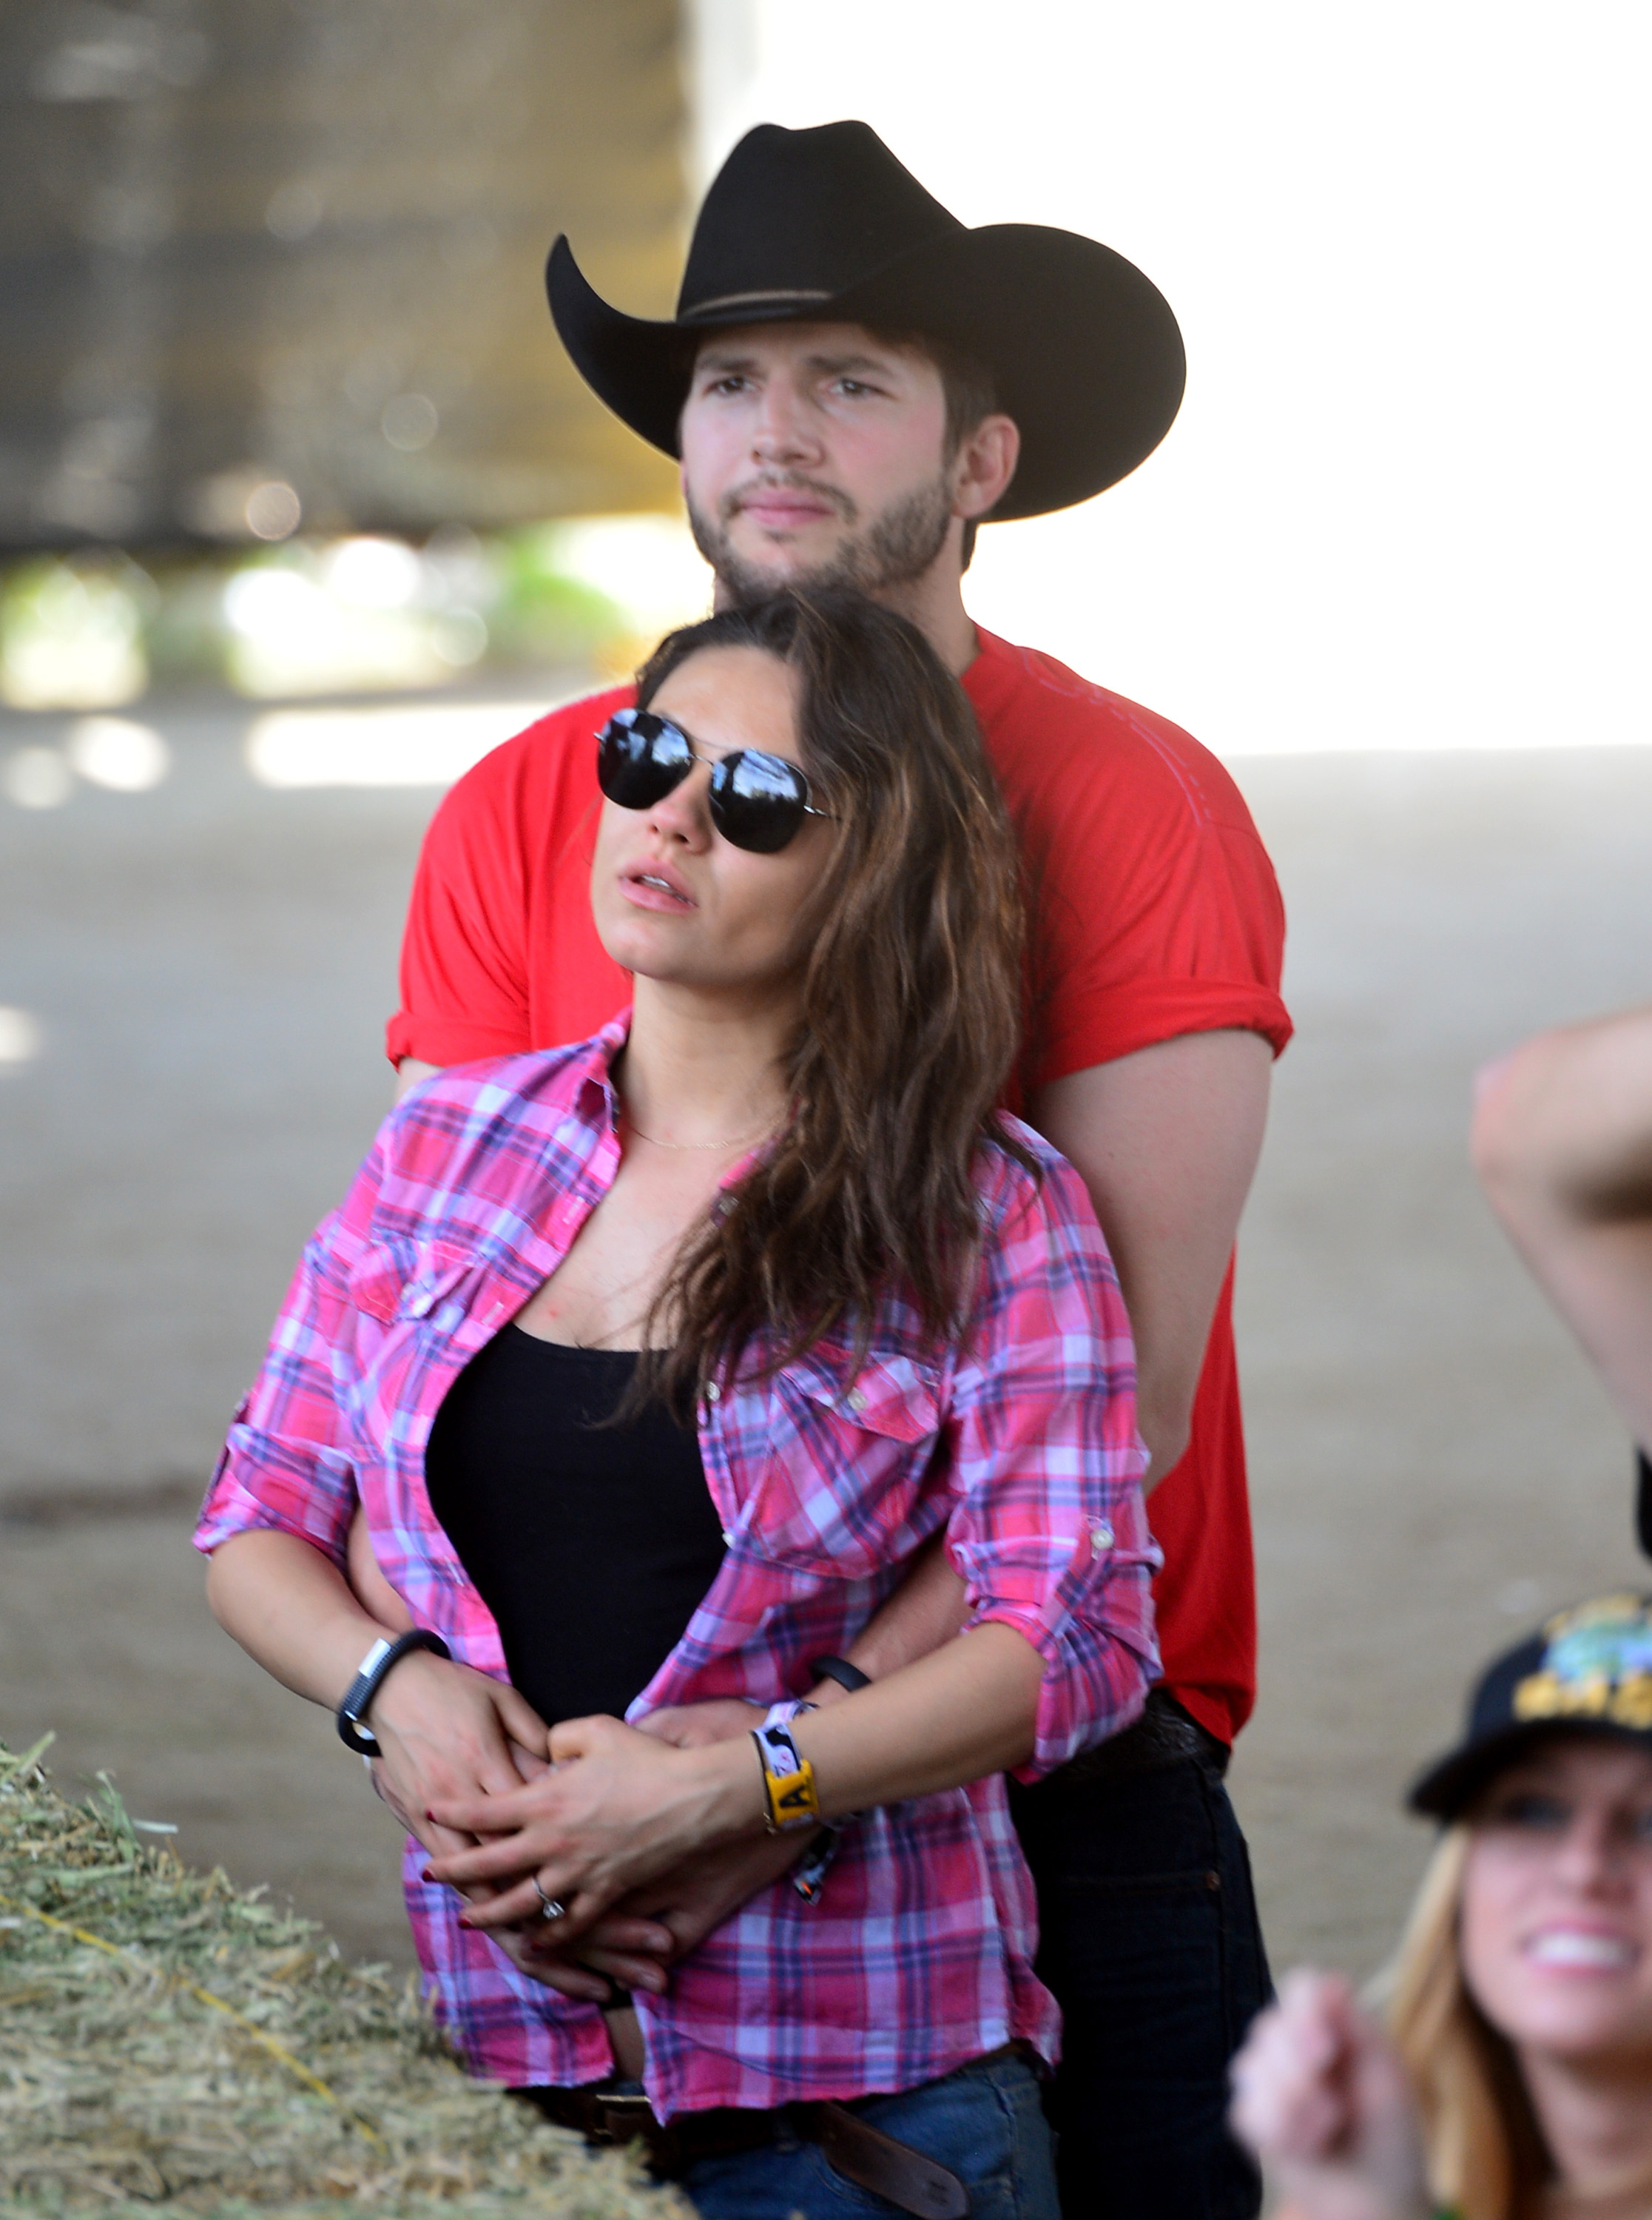 Mila Kunis and Ashton Kutcher on April 25, 2014, in Indio, California. | Source: Getty Images